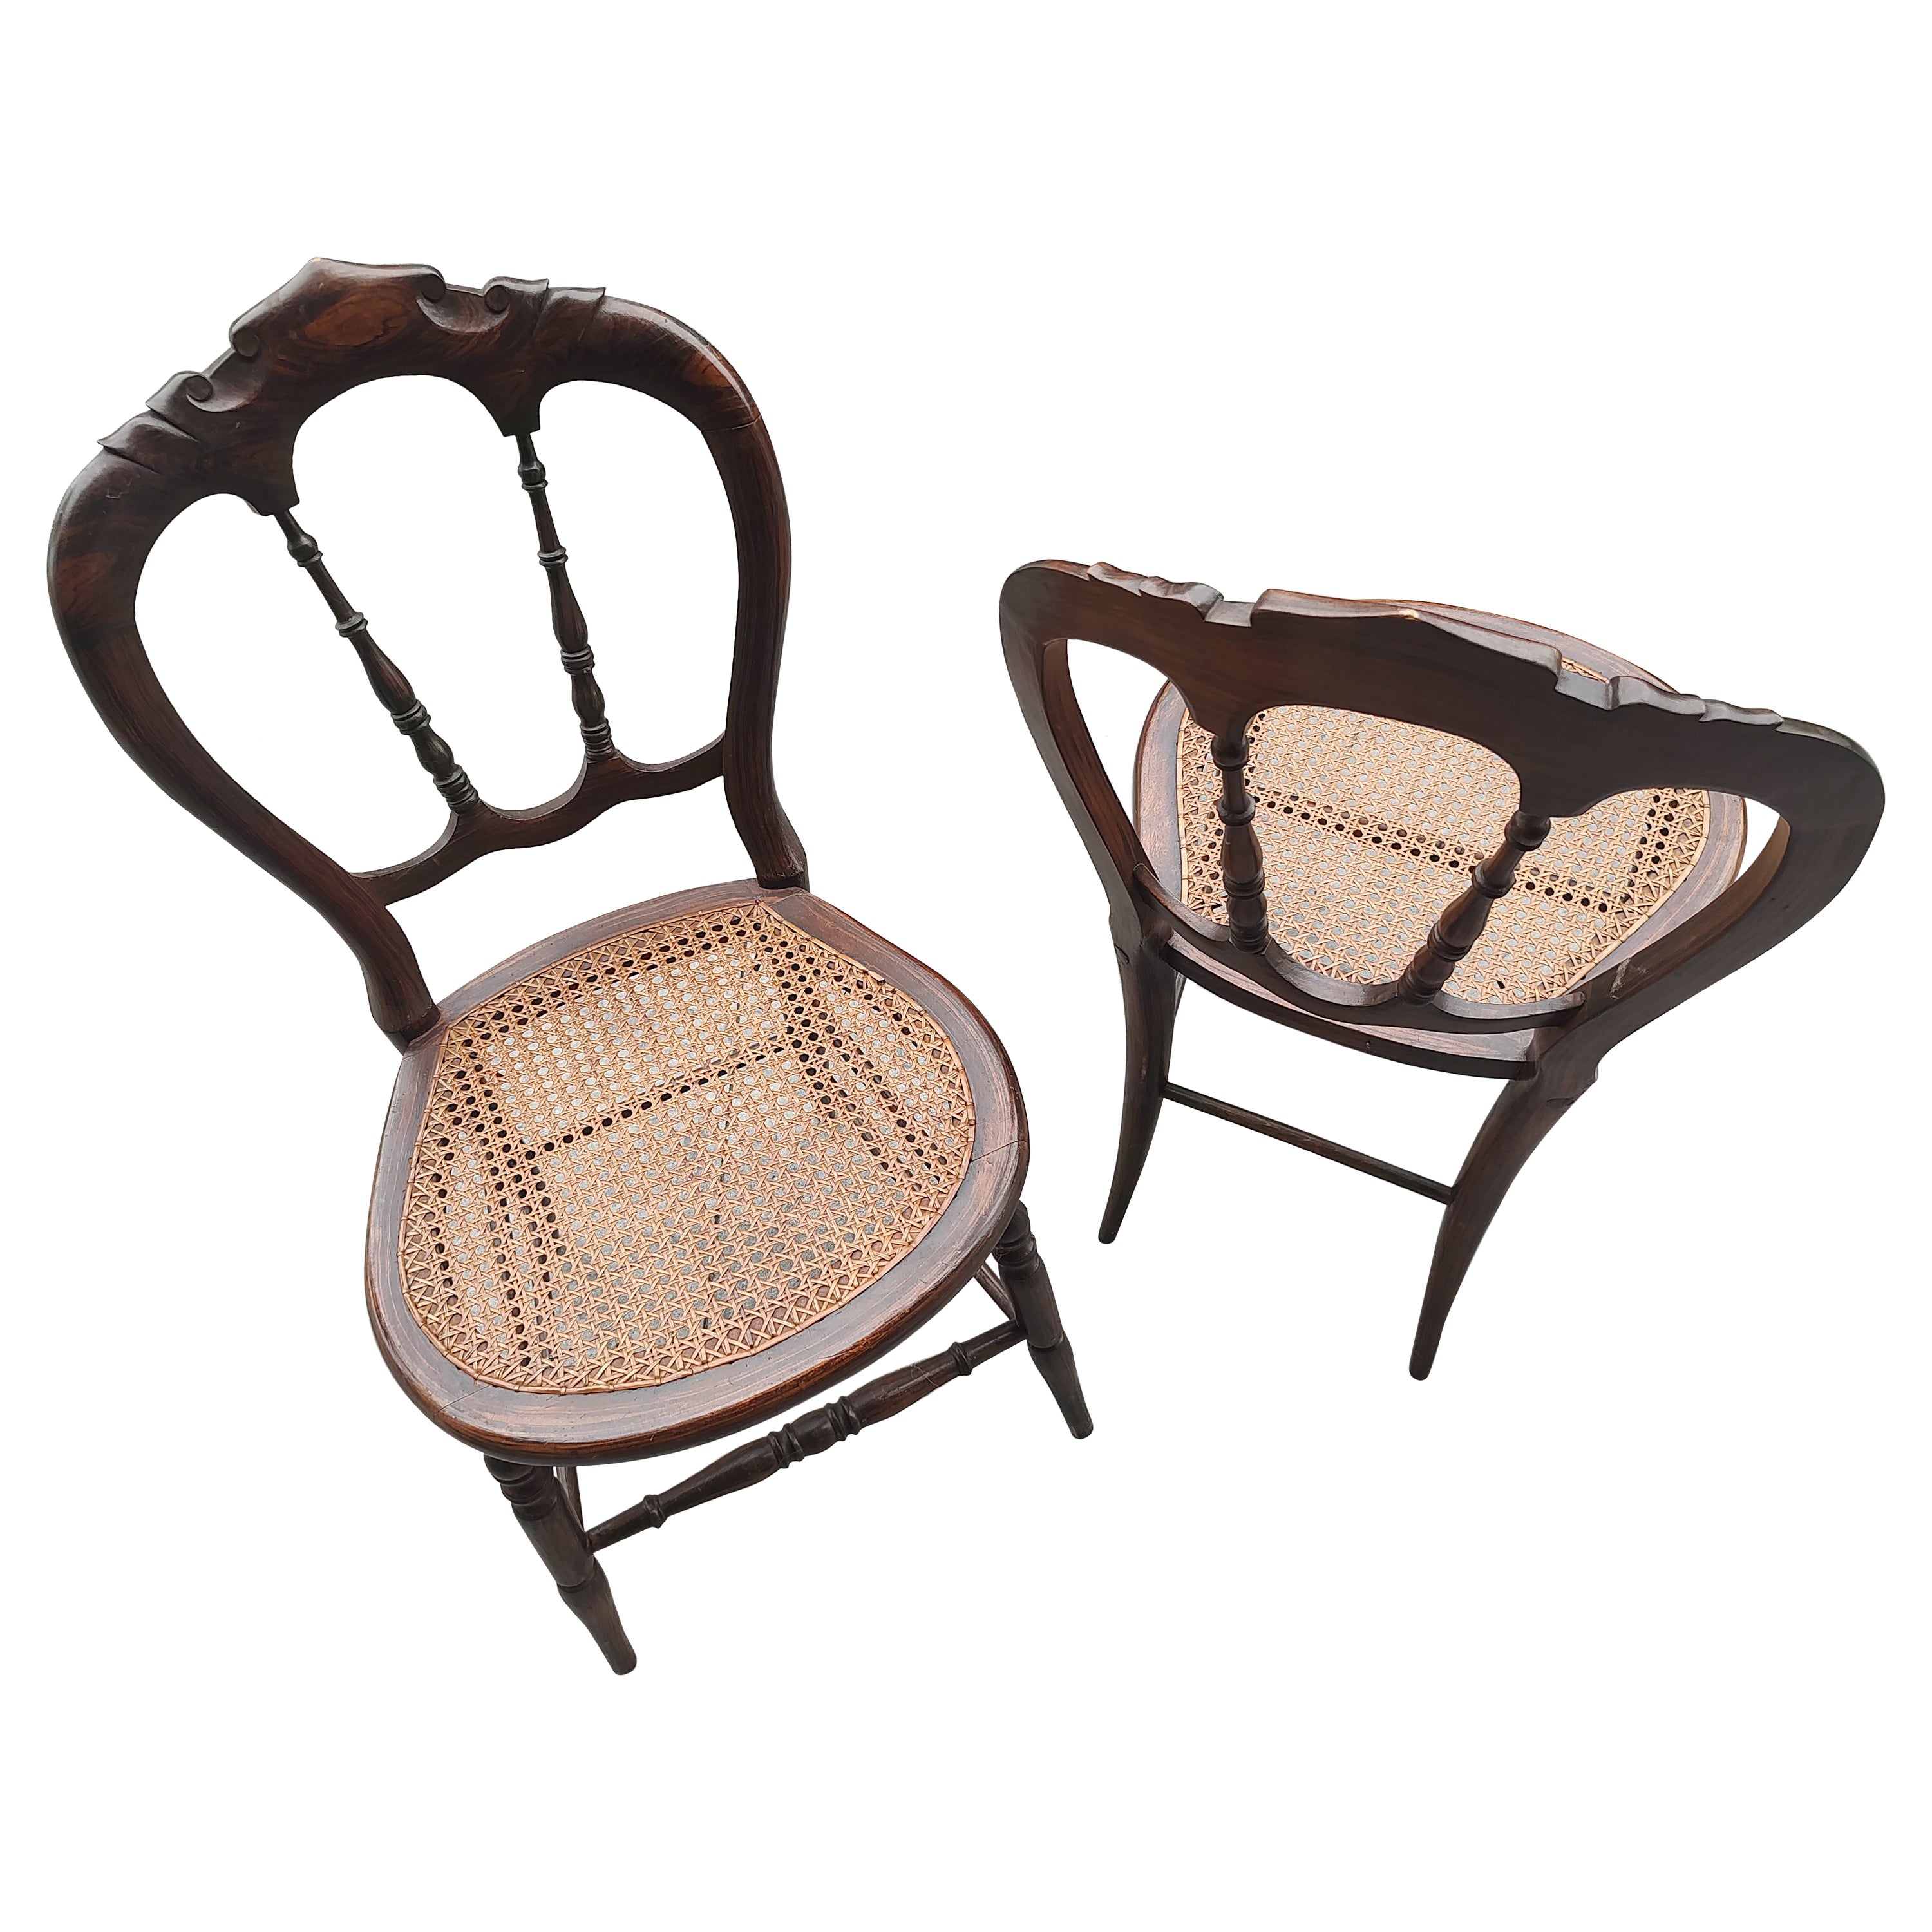 Pair of Mid-19th Century Grain Painted Rosewood Chiavari Chairs with Caned Seats For Sale